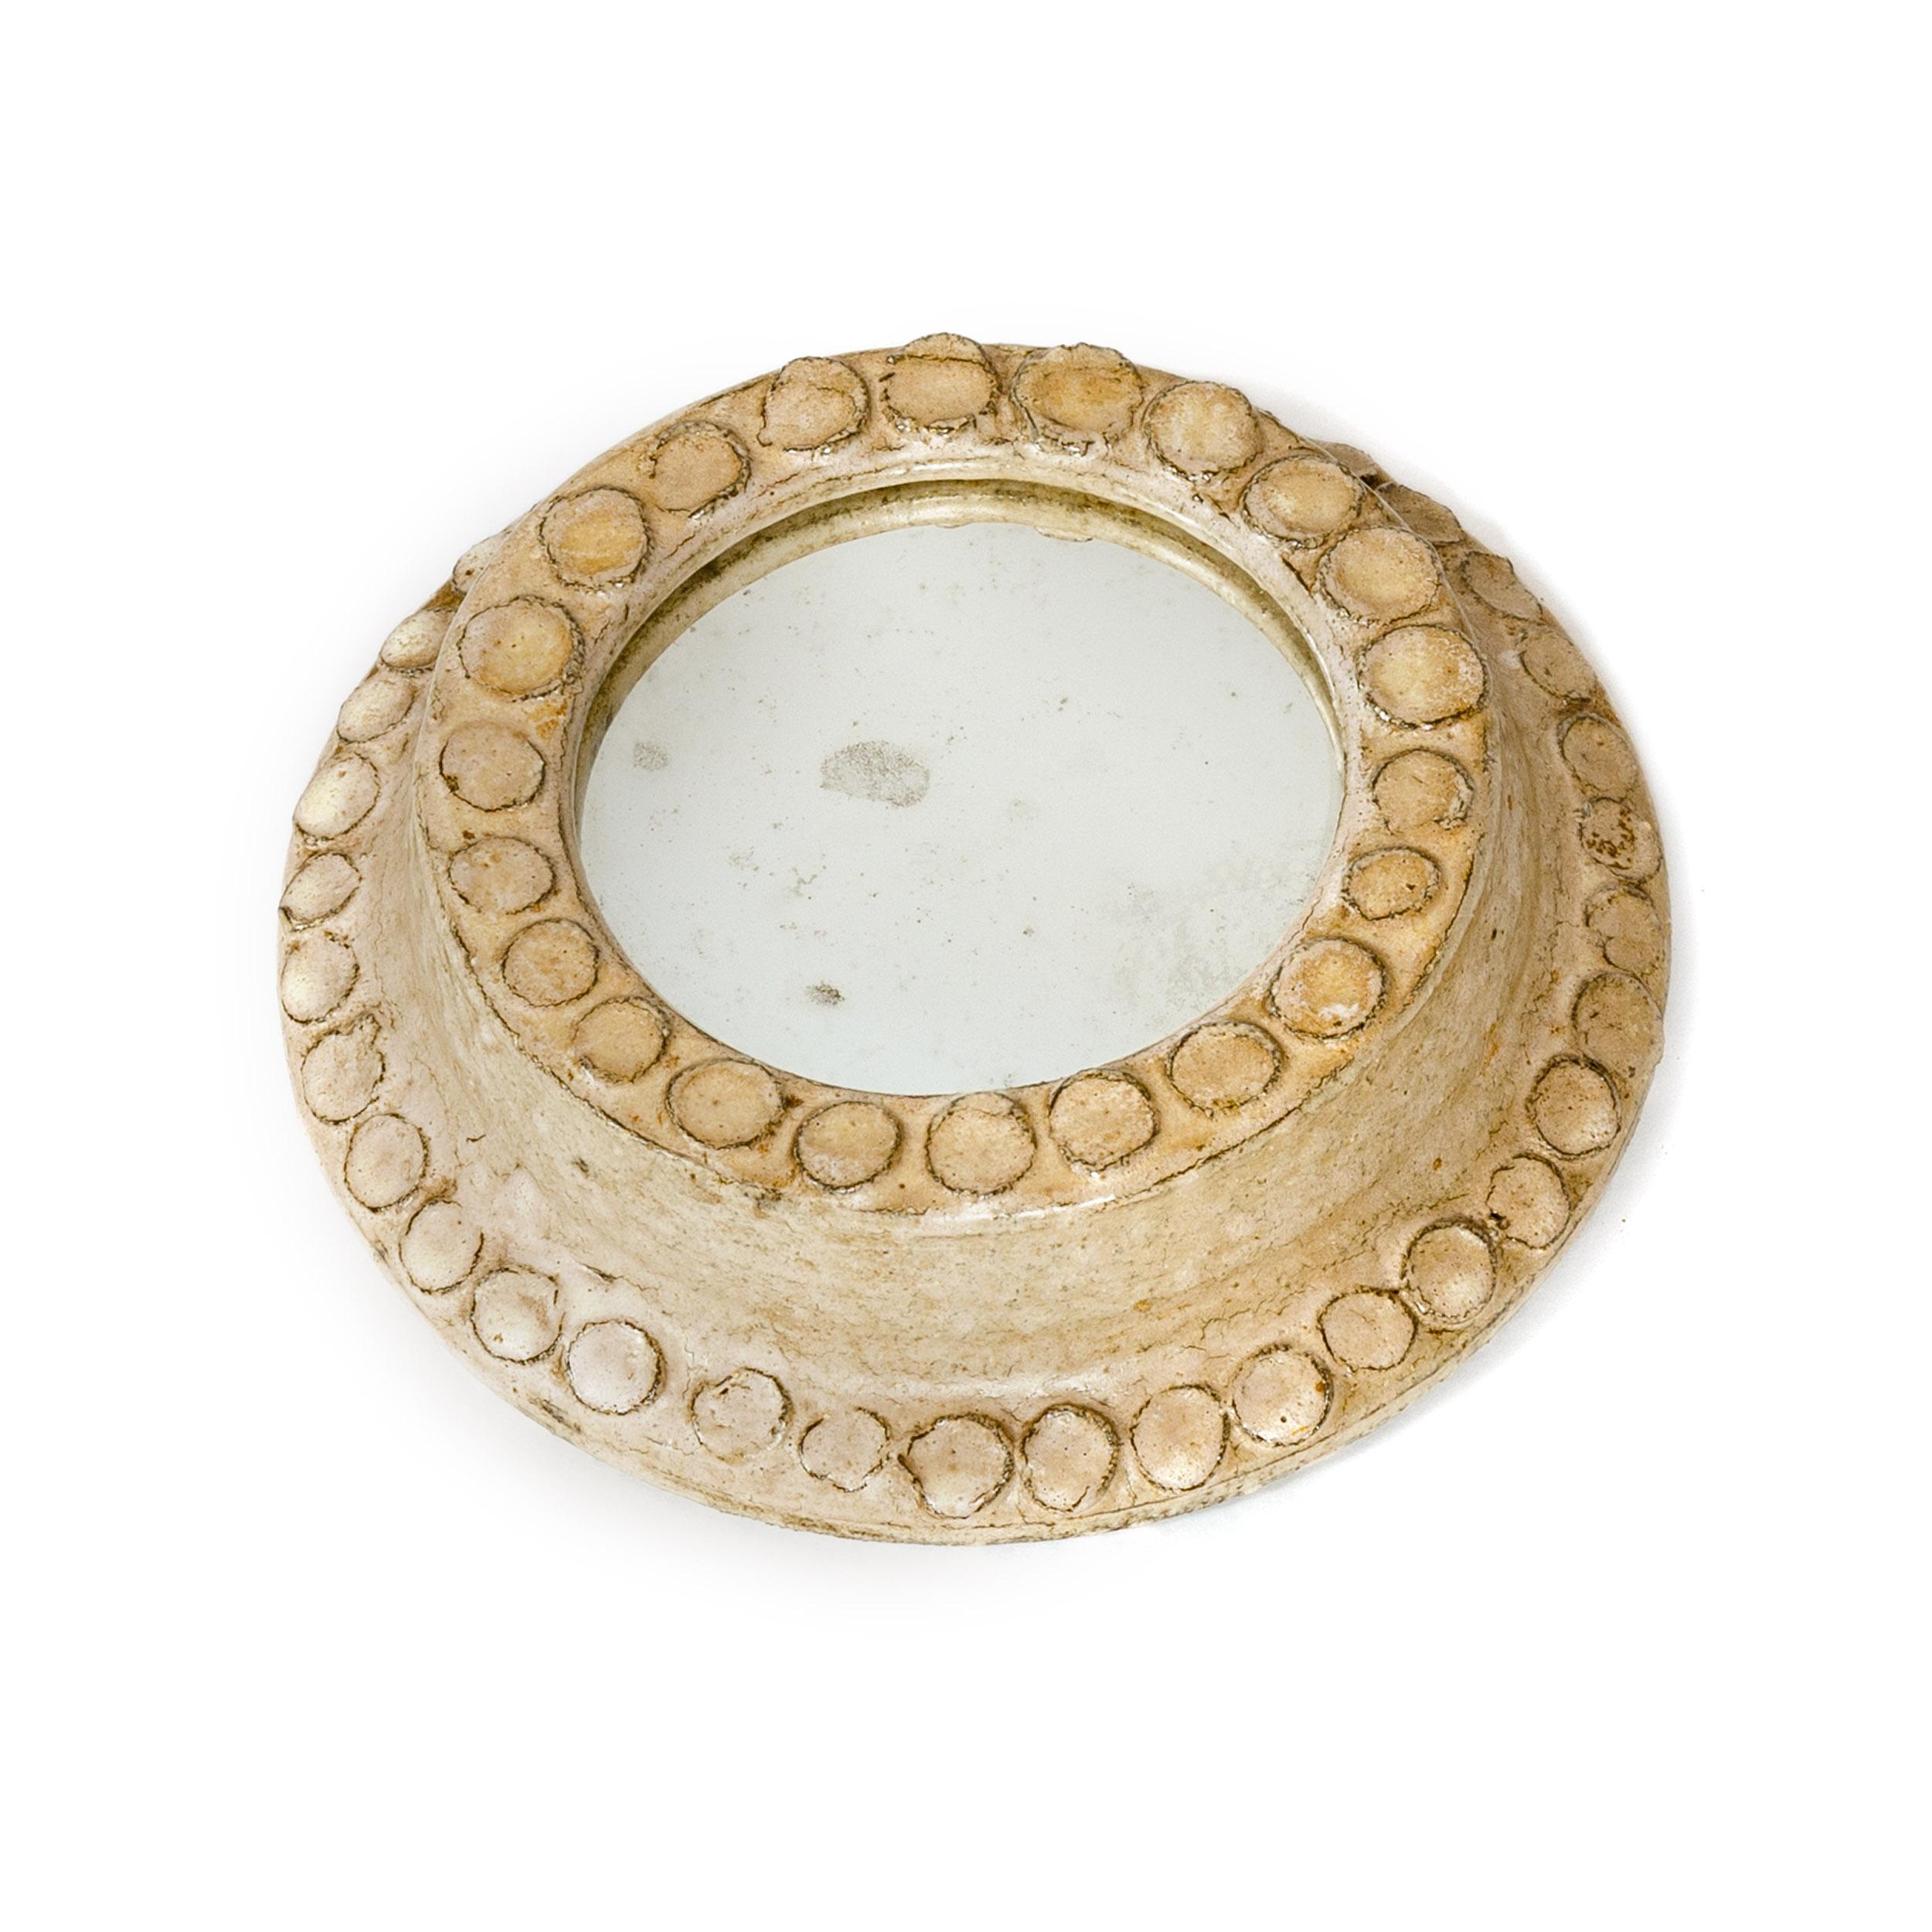 A petite, artisan crafted, hand-thrown diminutive wall mirror with an off-white hand applied glaze. On the mirror’s reverse are two nicely crafted loops to string mounting wire and the glass is backed with marbleized paper. No visible identifying